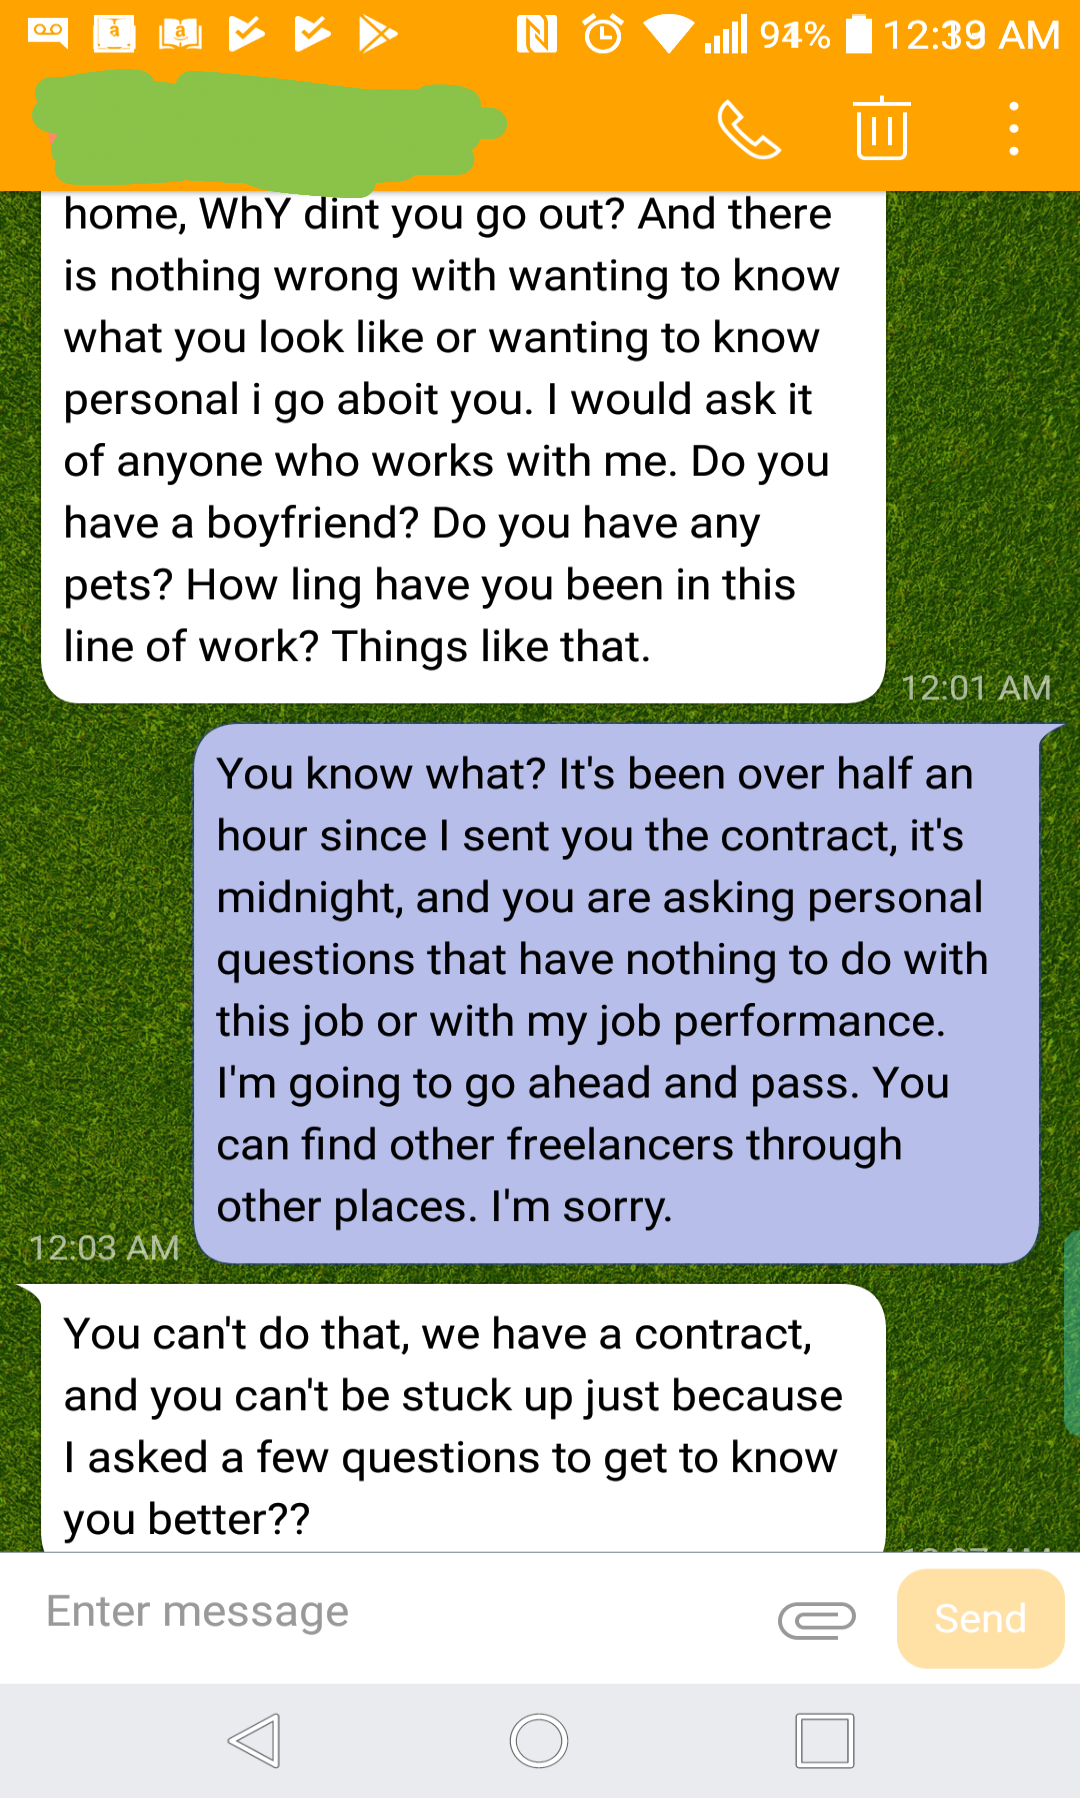 Freelance Boss Creeps Out a Possible Employee with Very Personal Questions